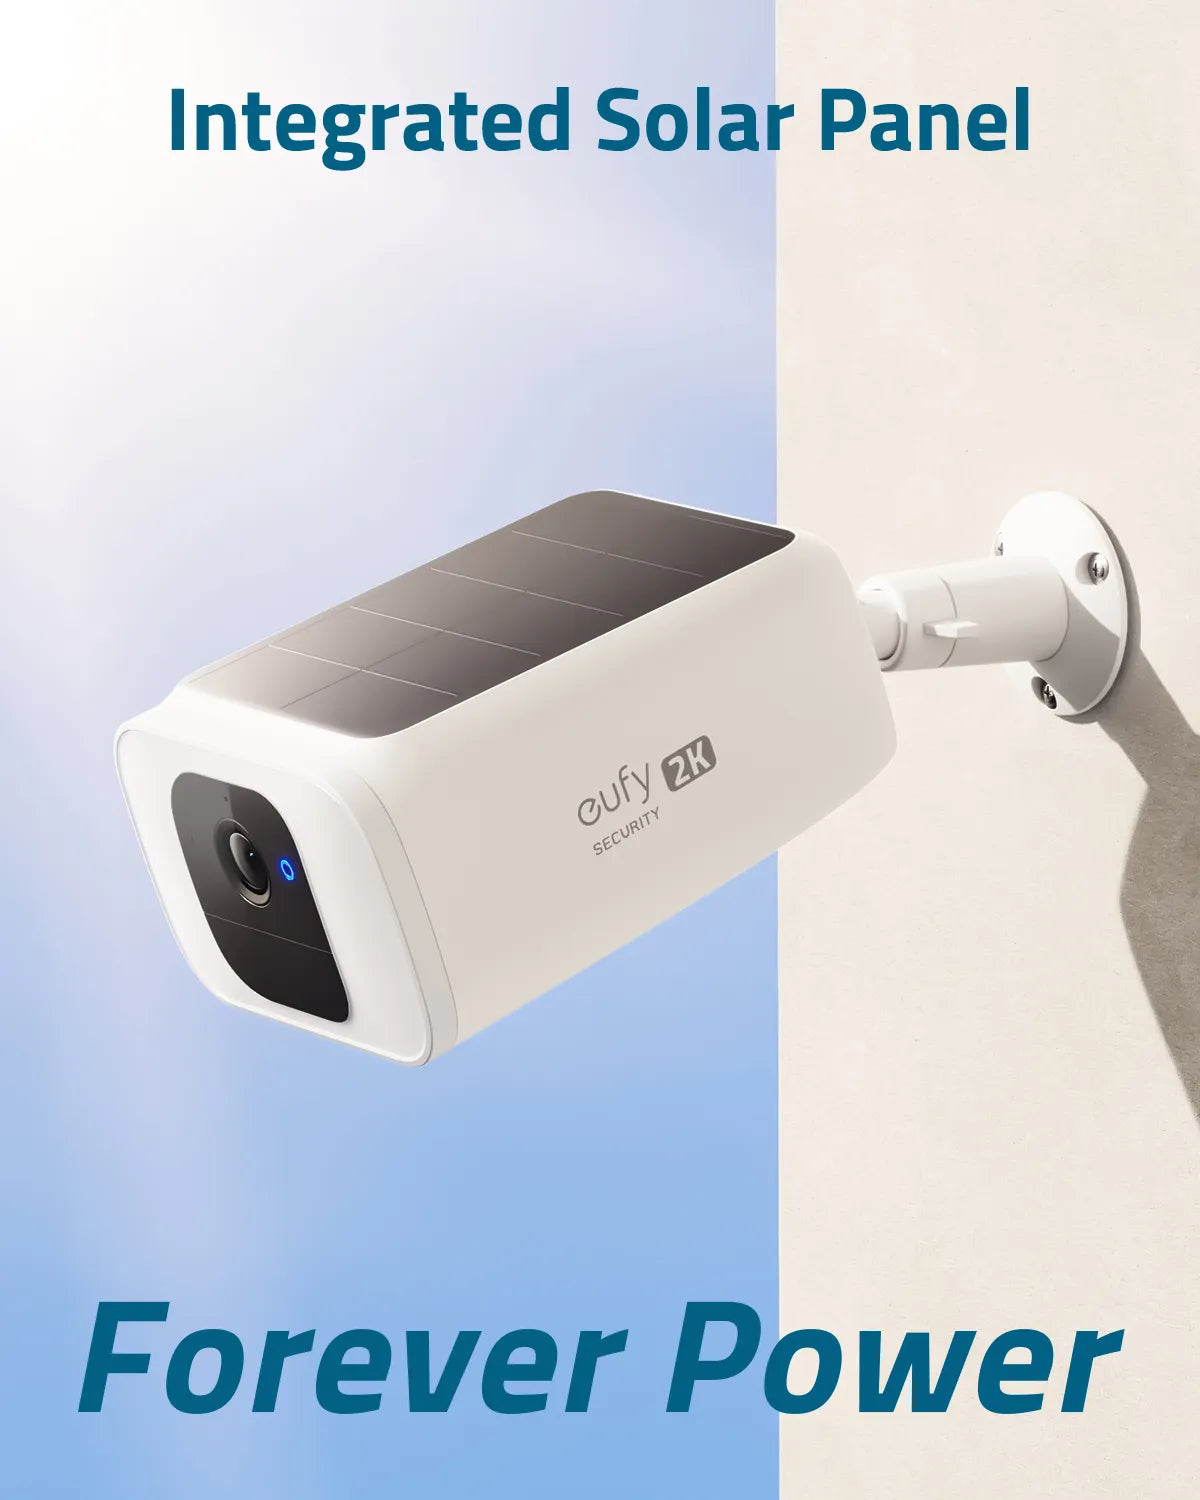 Eufy S40 Security SoloCam, Integrated Solar Panel @K Forever Power eufy